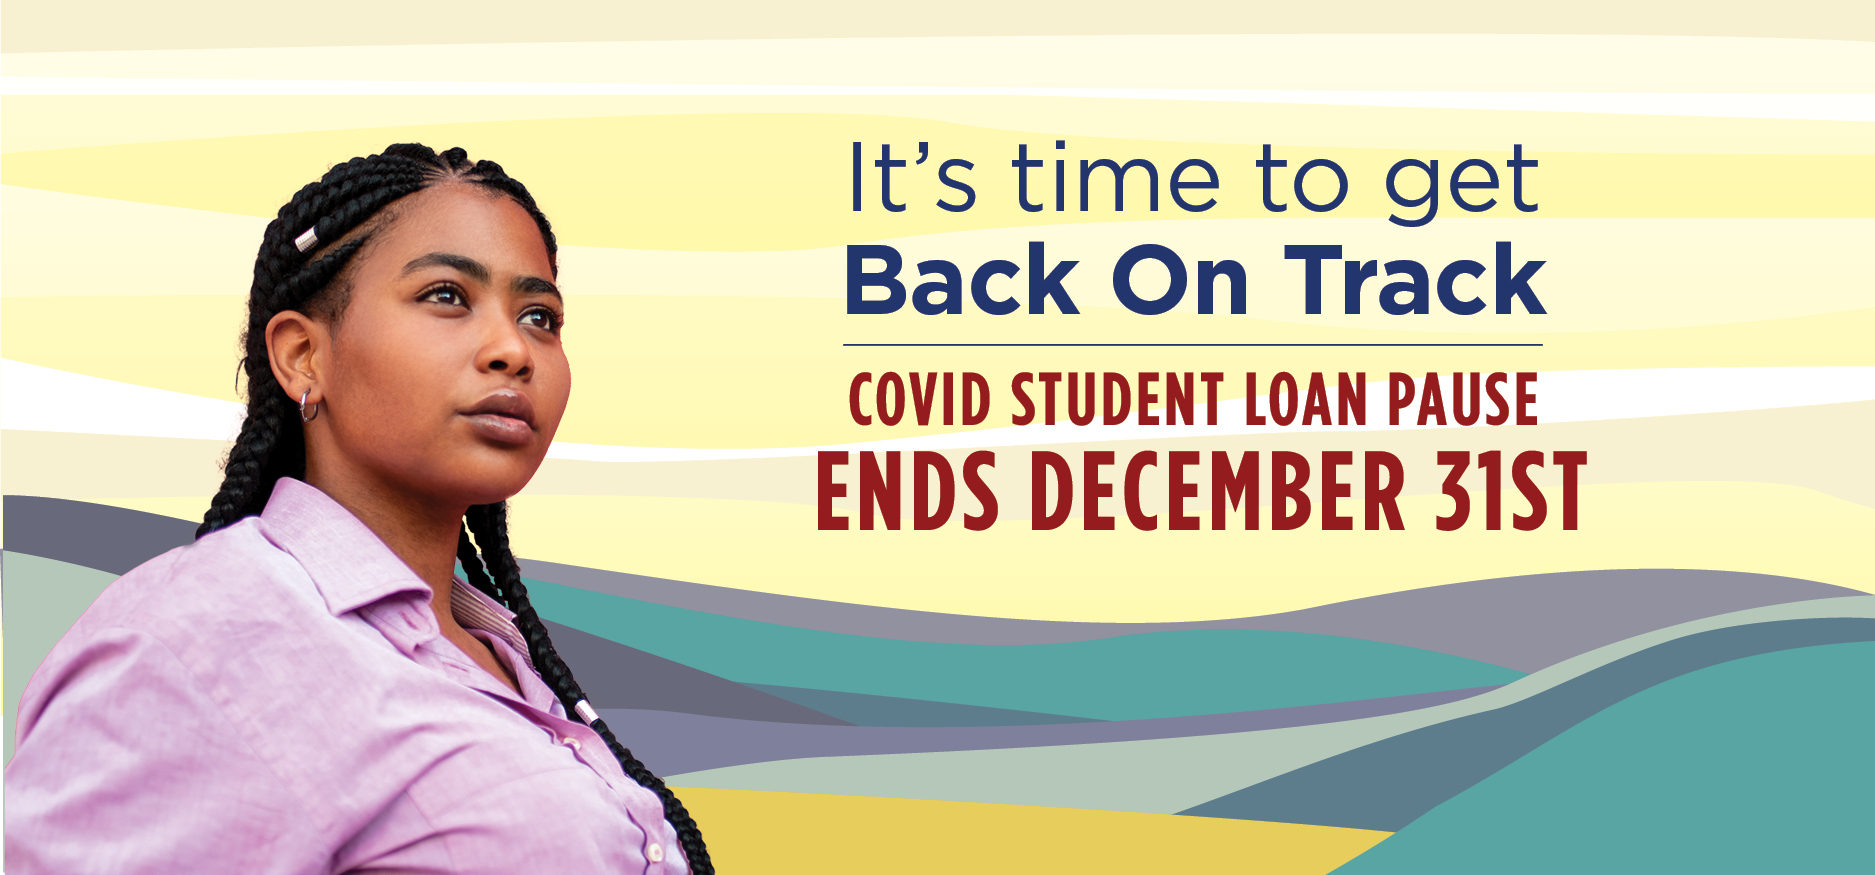 A lady looking foward with word: It's time to get back on track. Covid student loan pause ending soon.